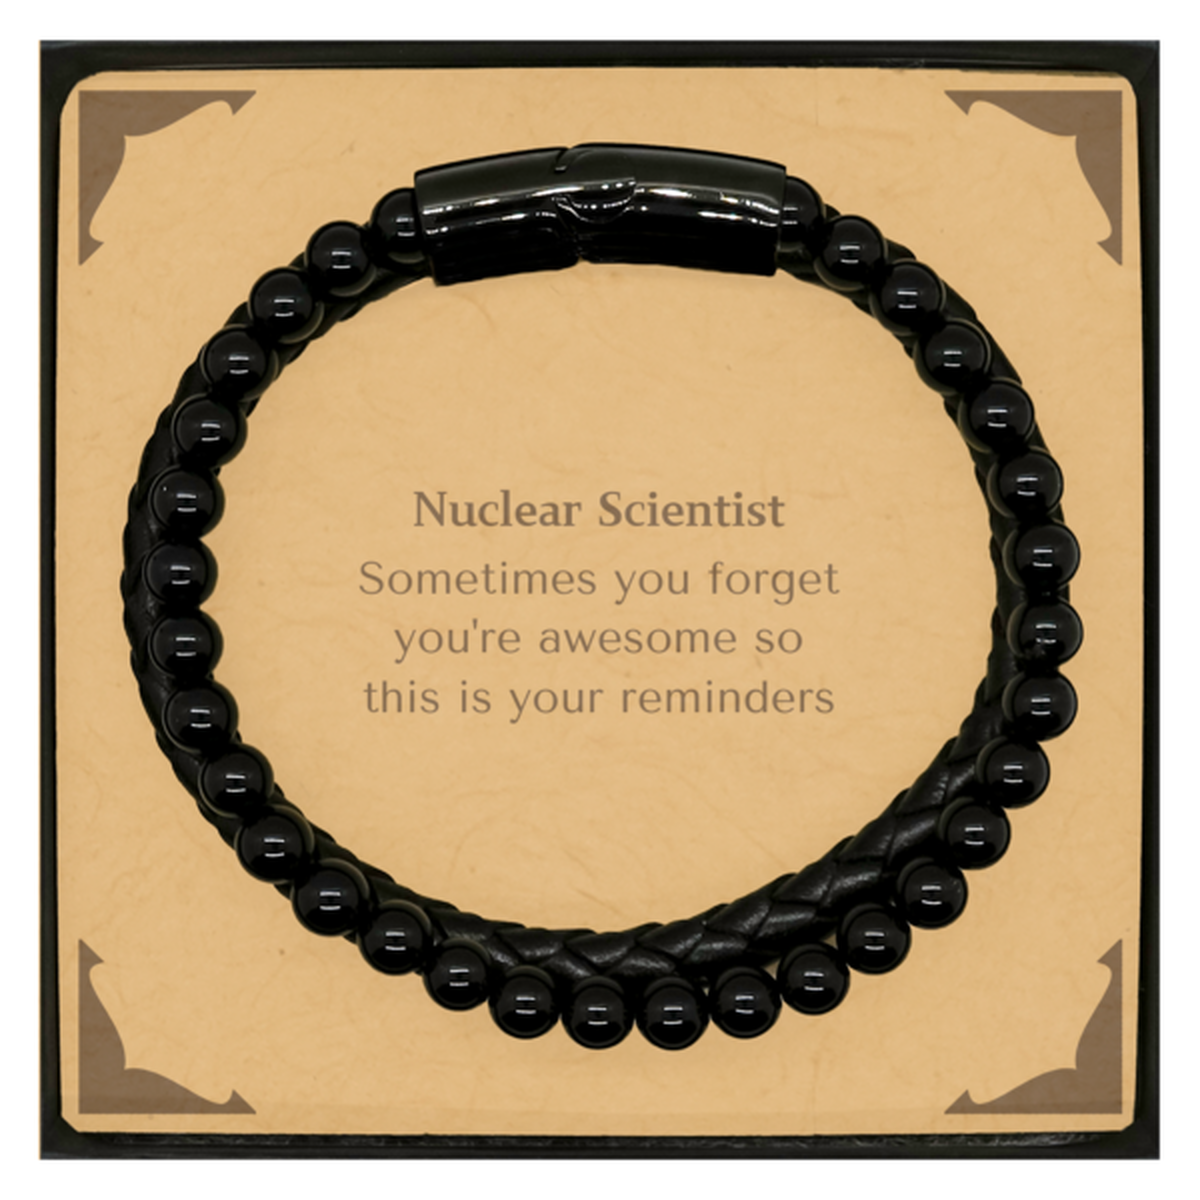 Sentimental Nuclear Scientist Stone Leather Bracelets, Nuclear Scientist Sometimes you forget you're awesome so this is your reminders, Graduation Christmas Birthday Gifts for Nuclear Scientist, Men, Women, Coworkers